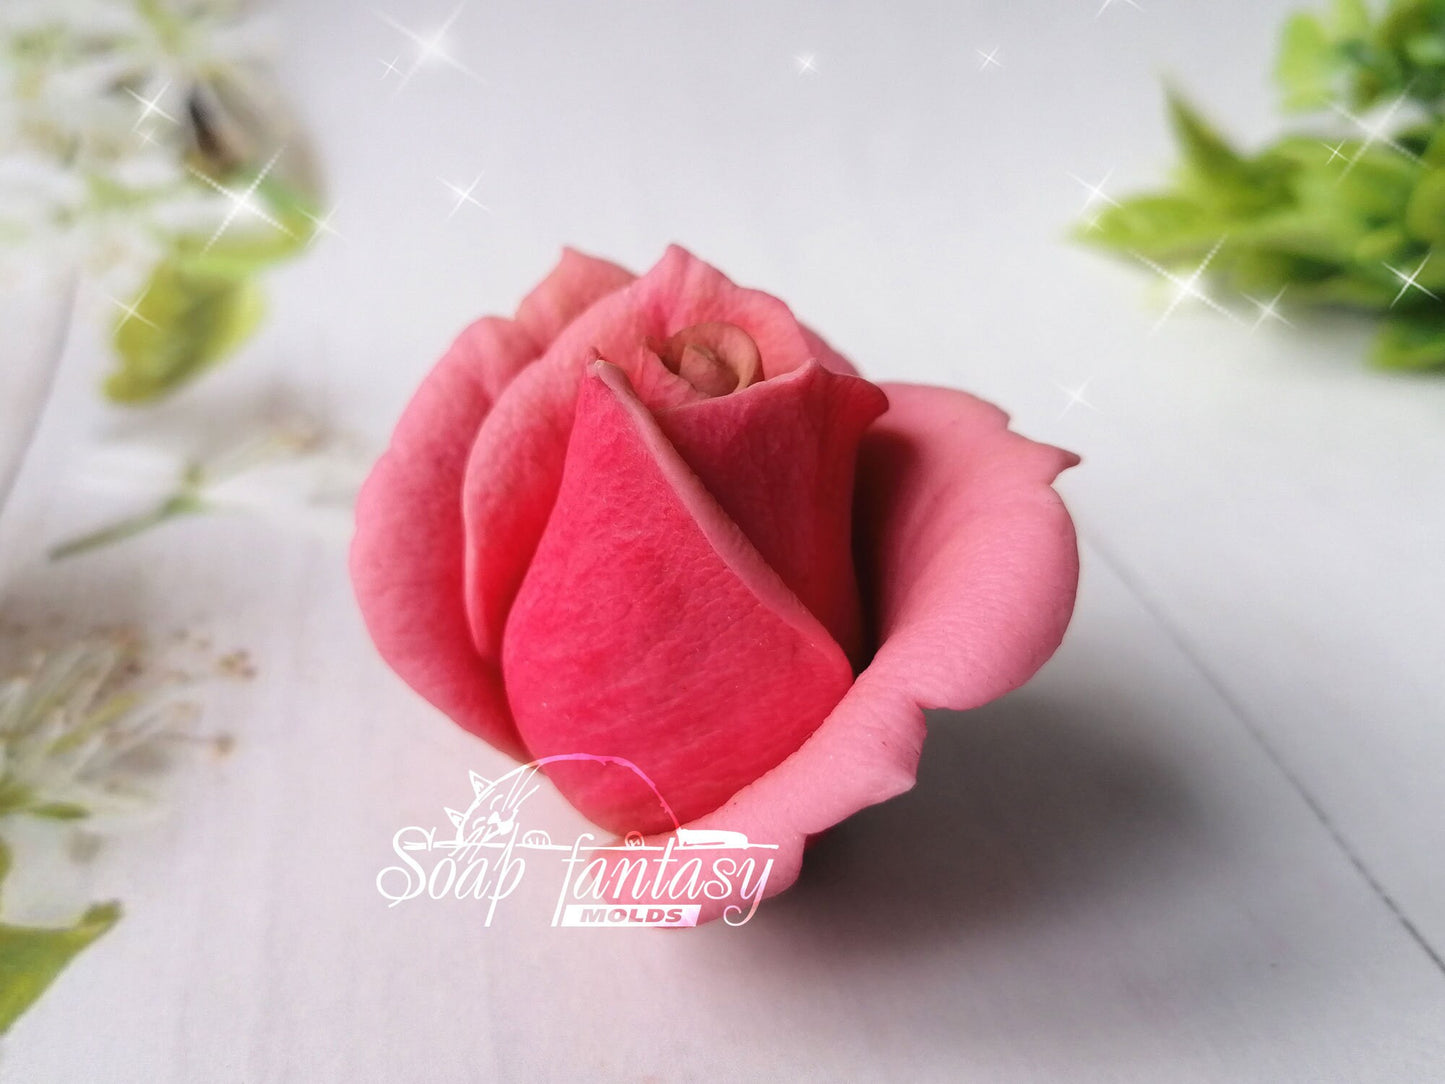 Rose "Butterfly" silicone mold for soap making